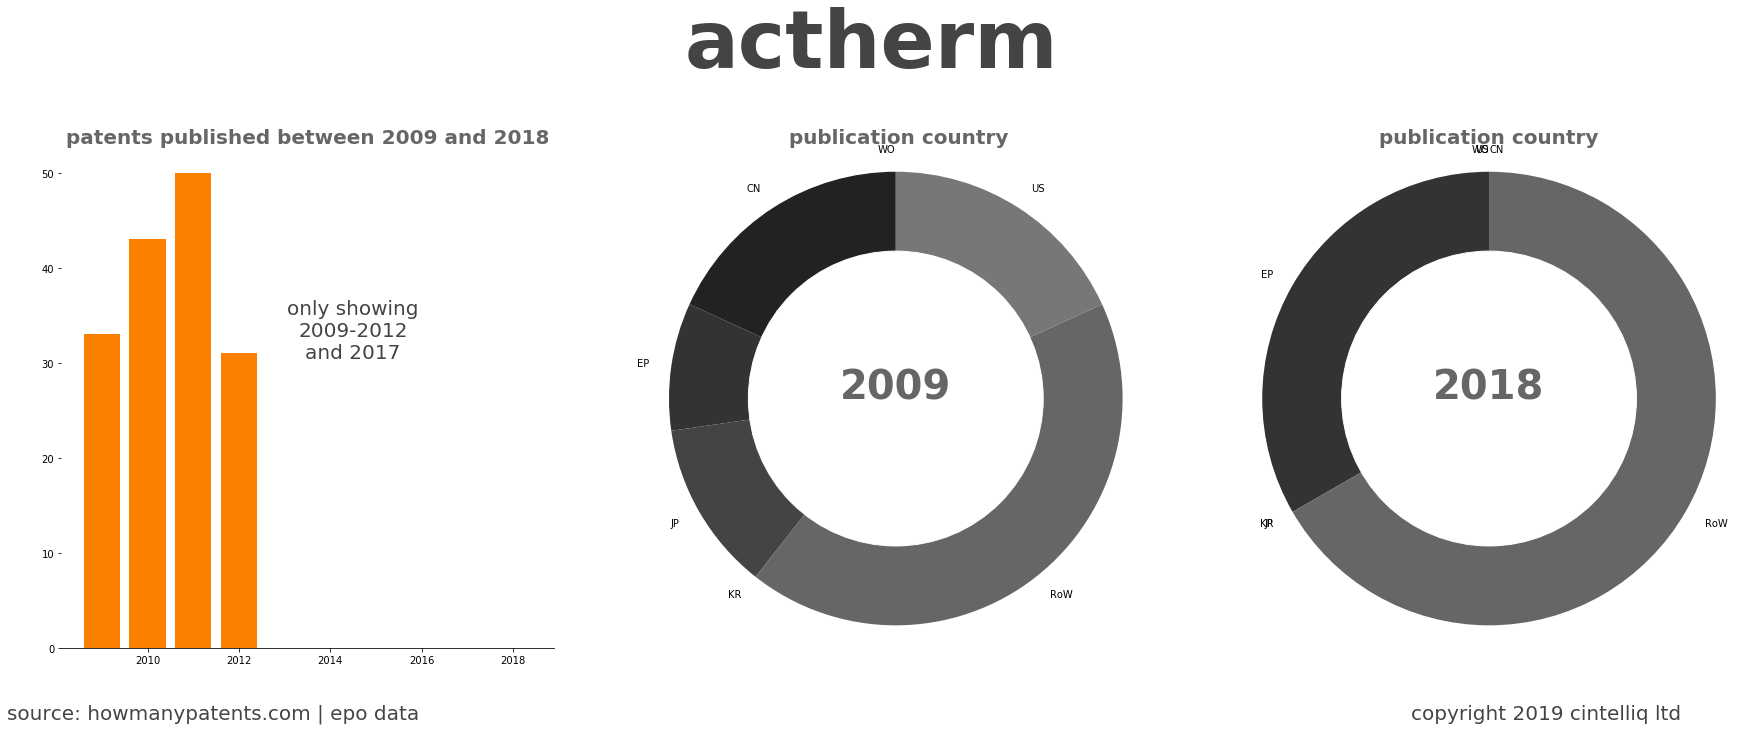 summary of patents for Actherm